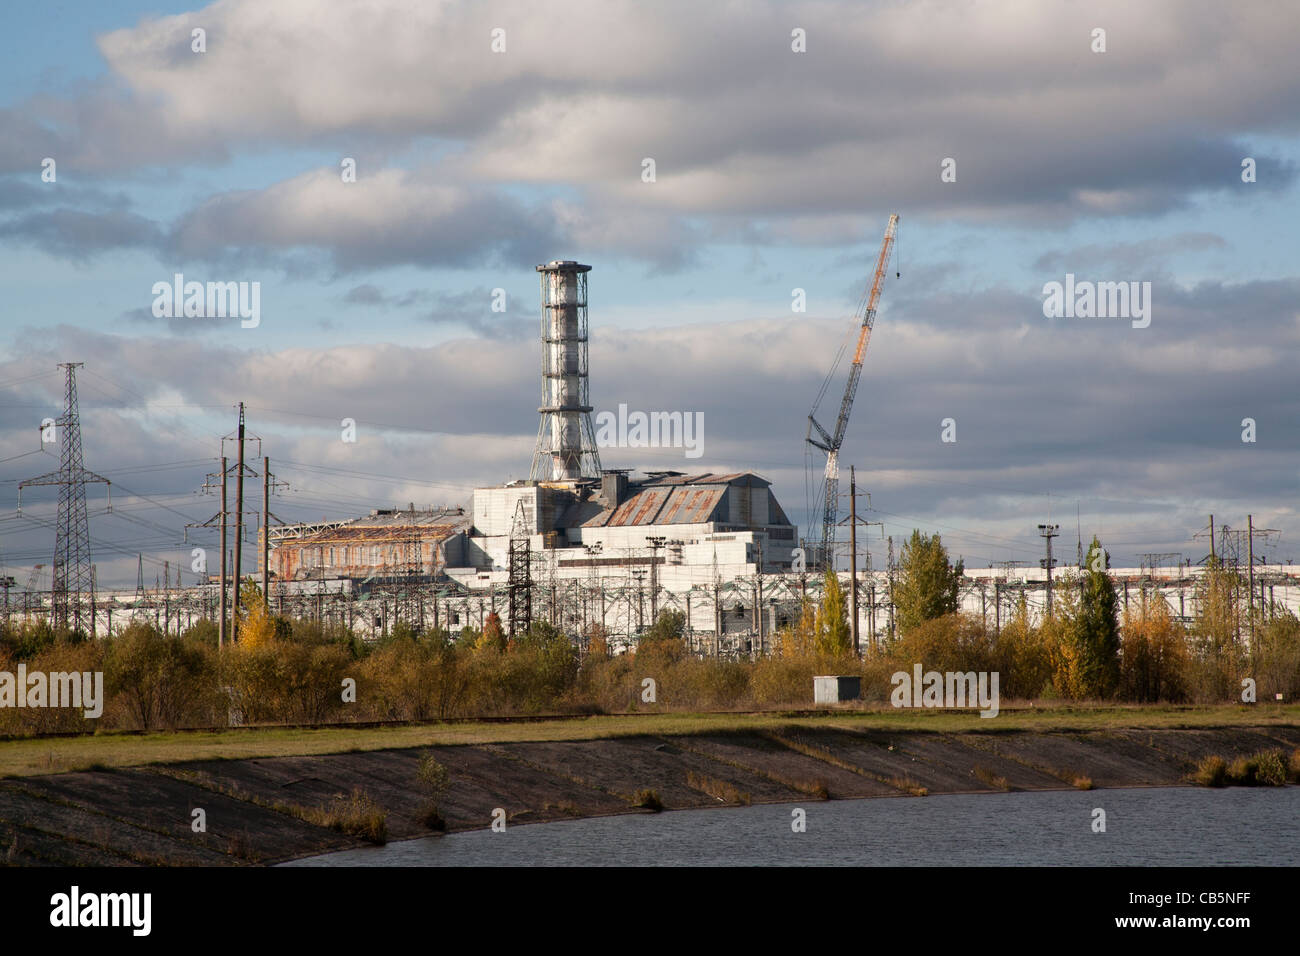 The Pripyat River or Prypiat River with the Chernobyl nuclear power plant in the background Chernobyl Ukraine Stock Photo